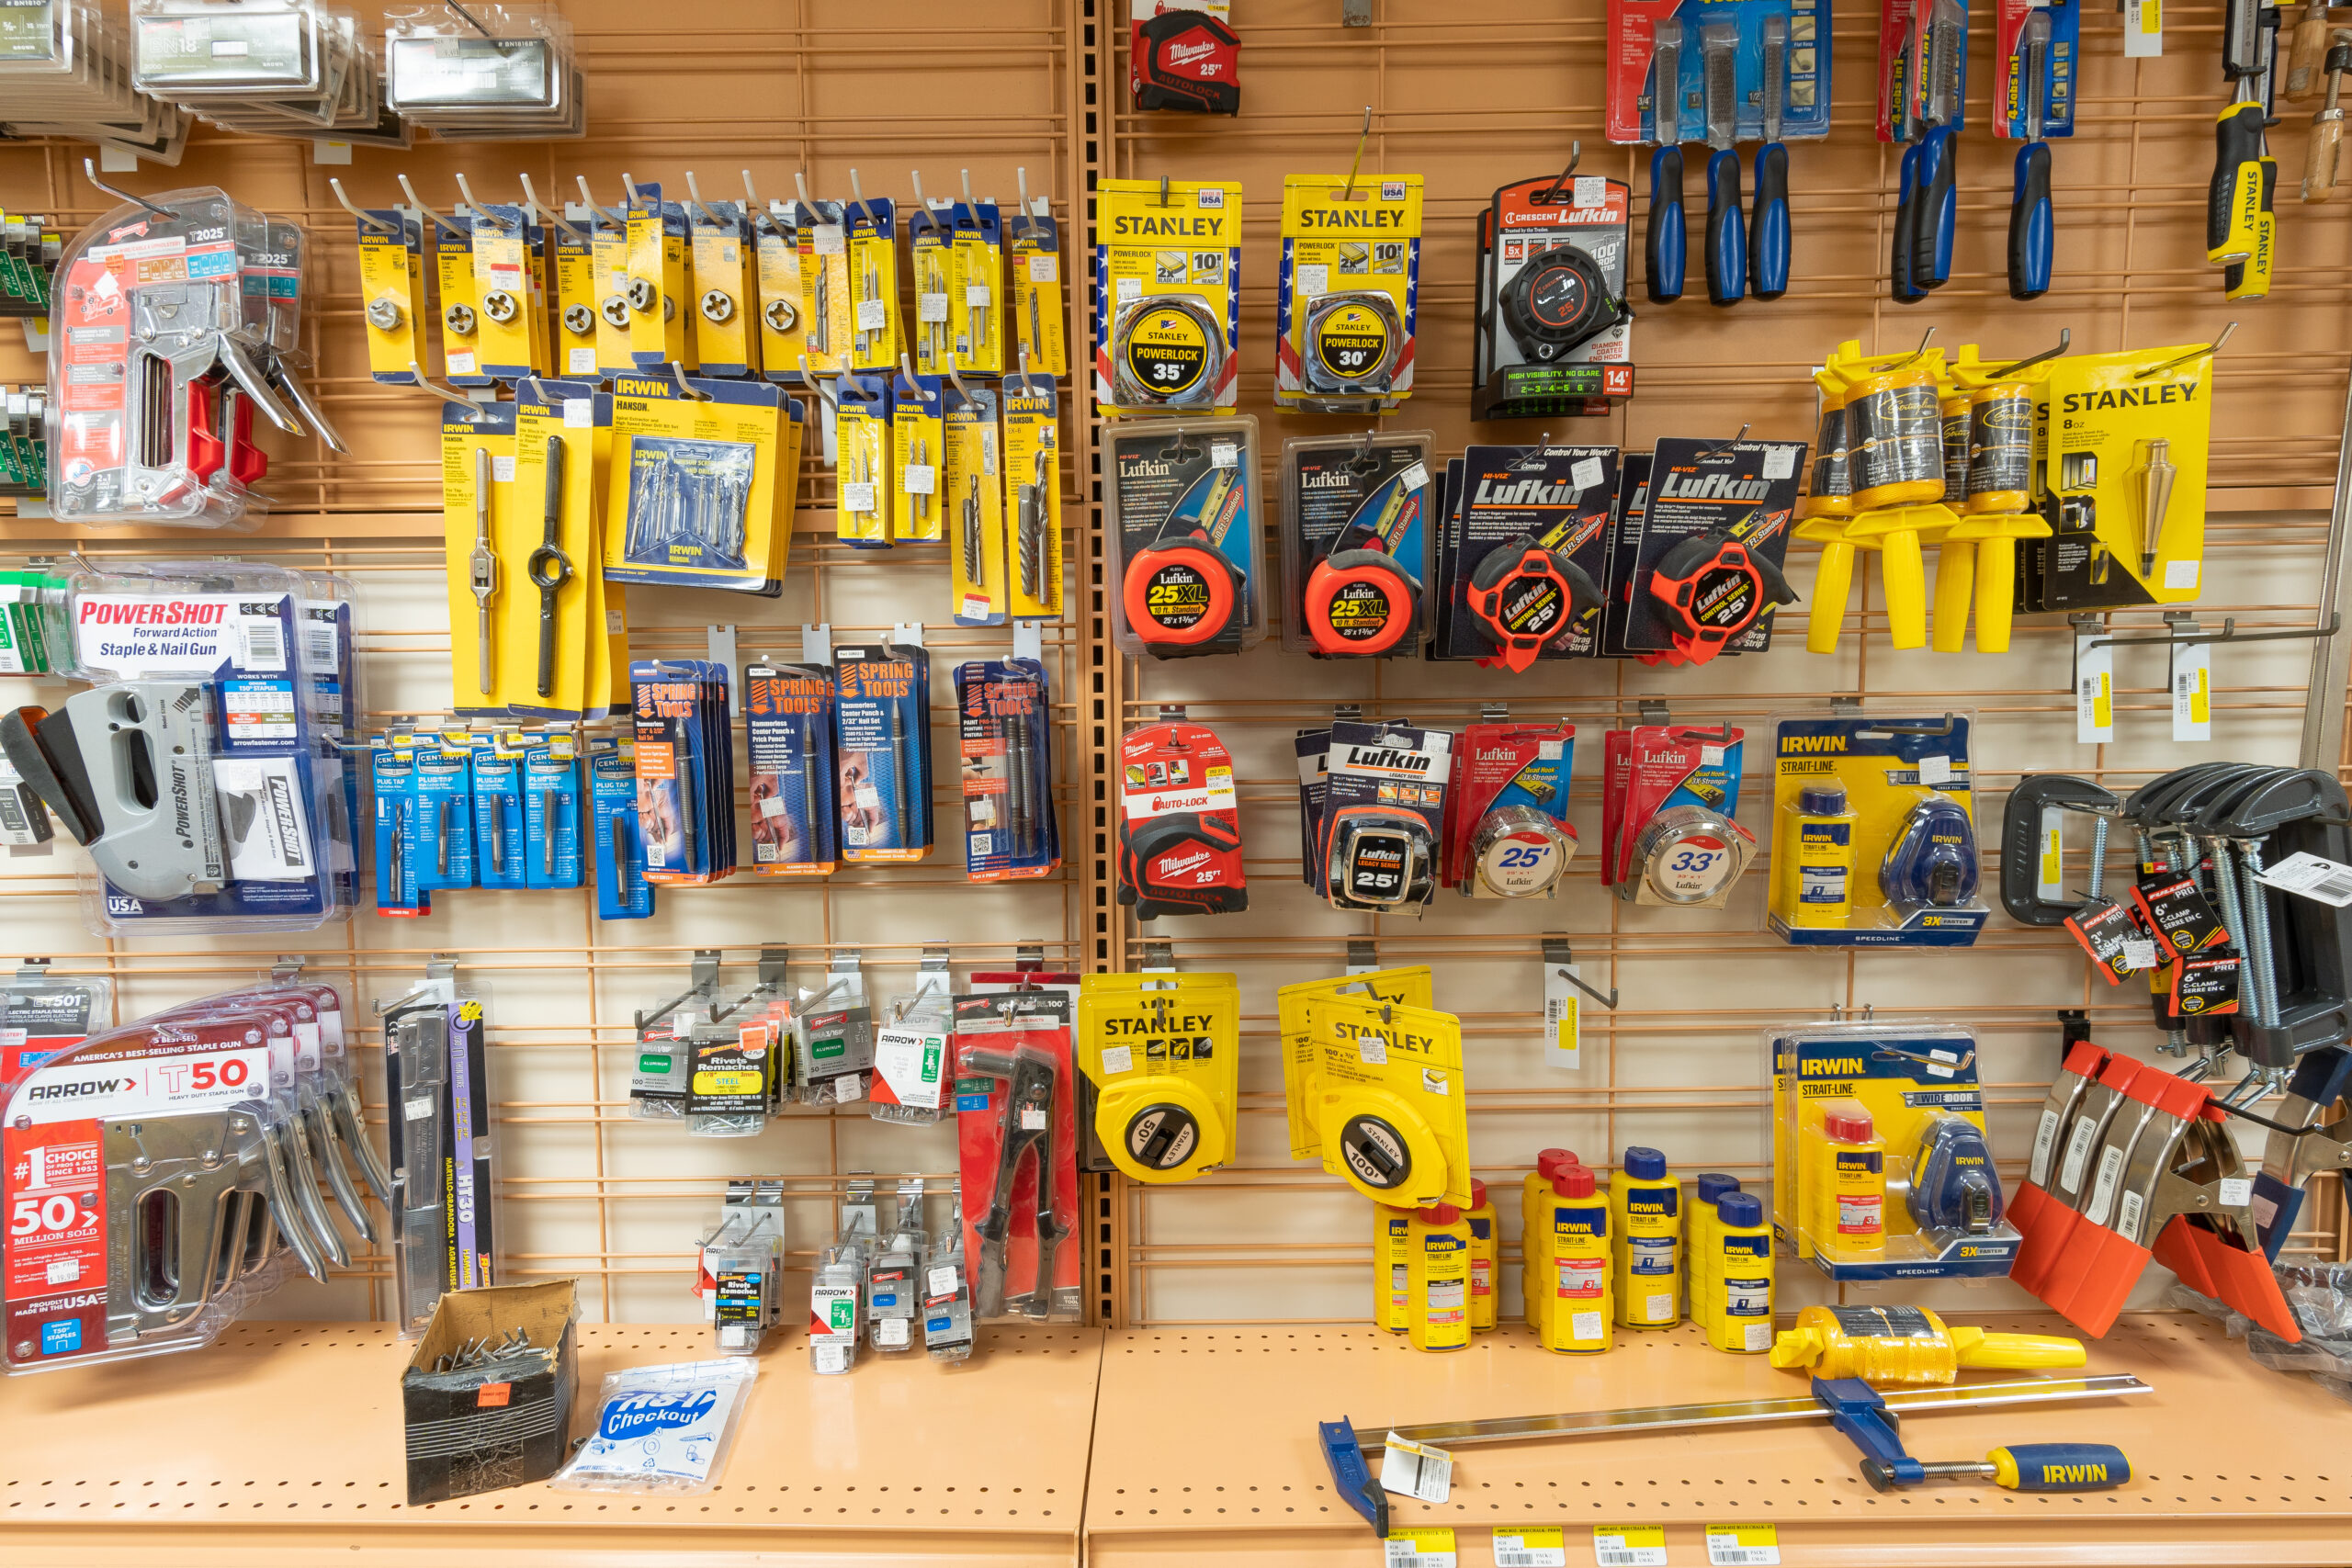 Tools like tape measures, wrenches, staple guns, and clamps.